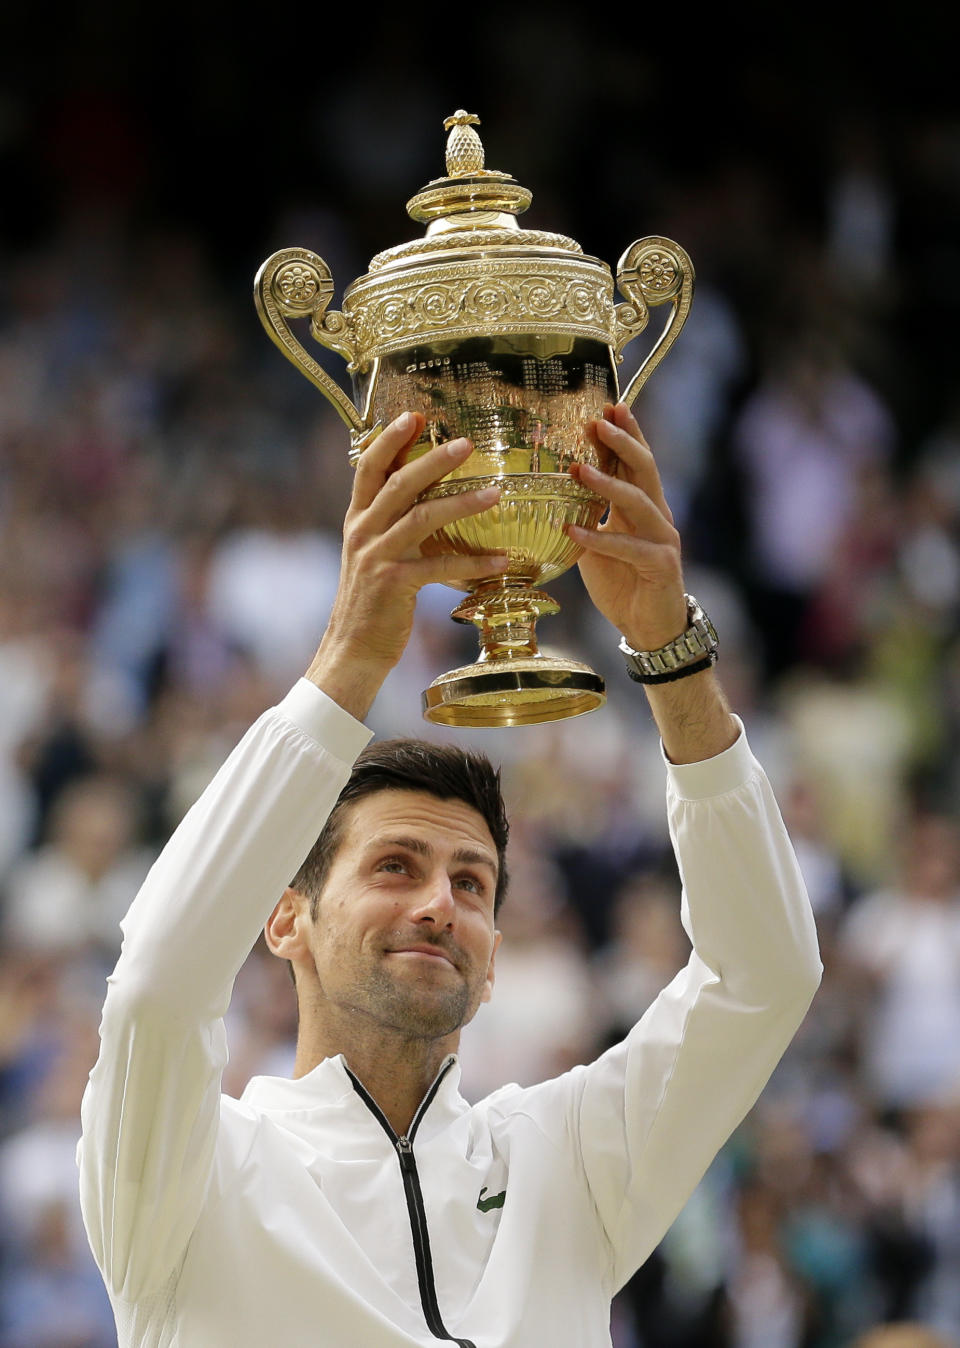 Serbia's Novak Djokovic lifts the trophy after defeating Switzerland's Roger Federer in the men's singles final match of the Wimbledon Tennis Championships in London, Sunday, July 14, 2019. (AP Photo/Tim Ireland)